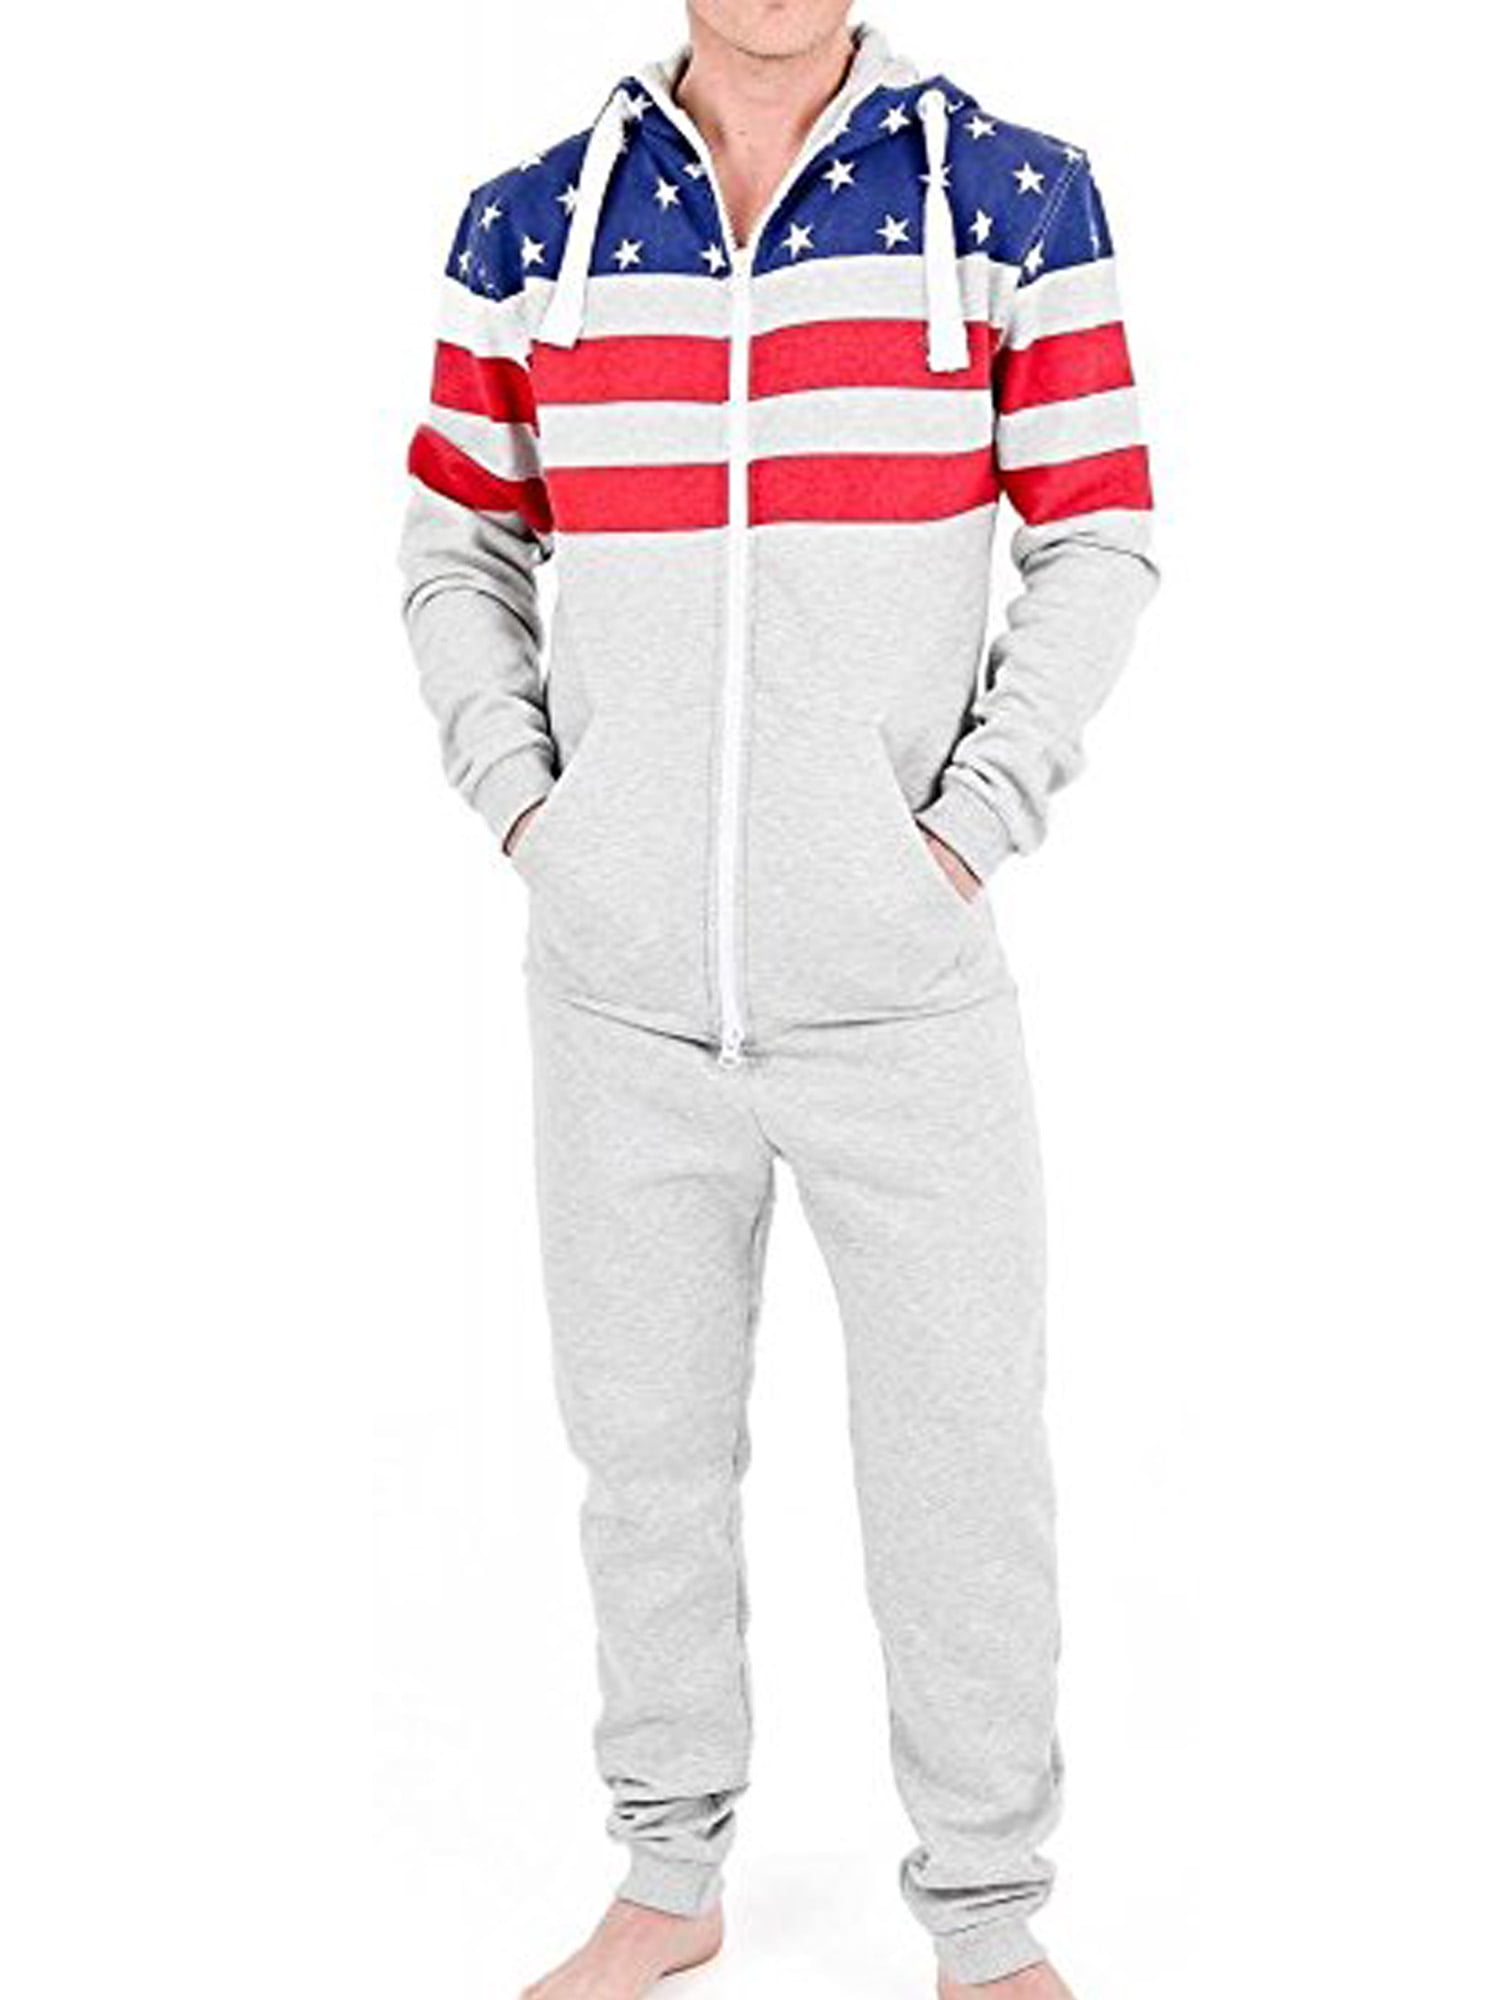 SKYLINEWEARS Mens Onesie Playsuit Jumpsuit one Piece Non Footed Pajamas Canadian Flag